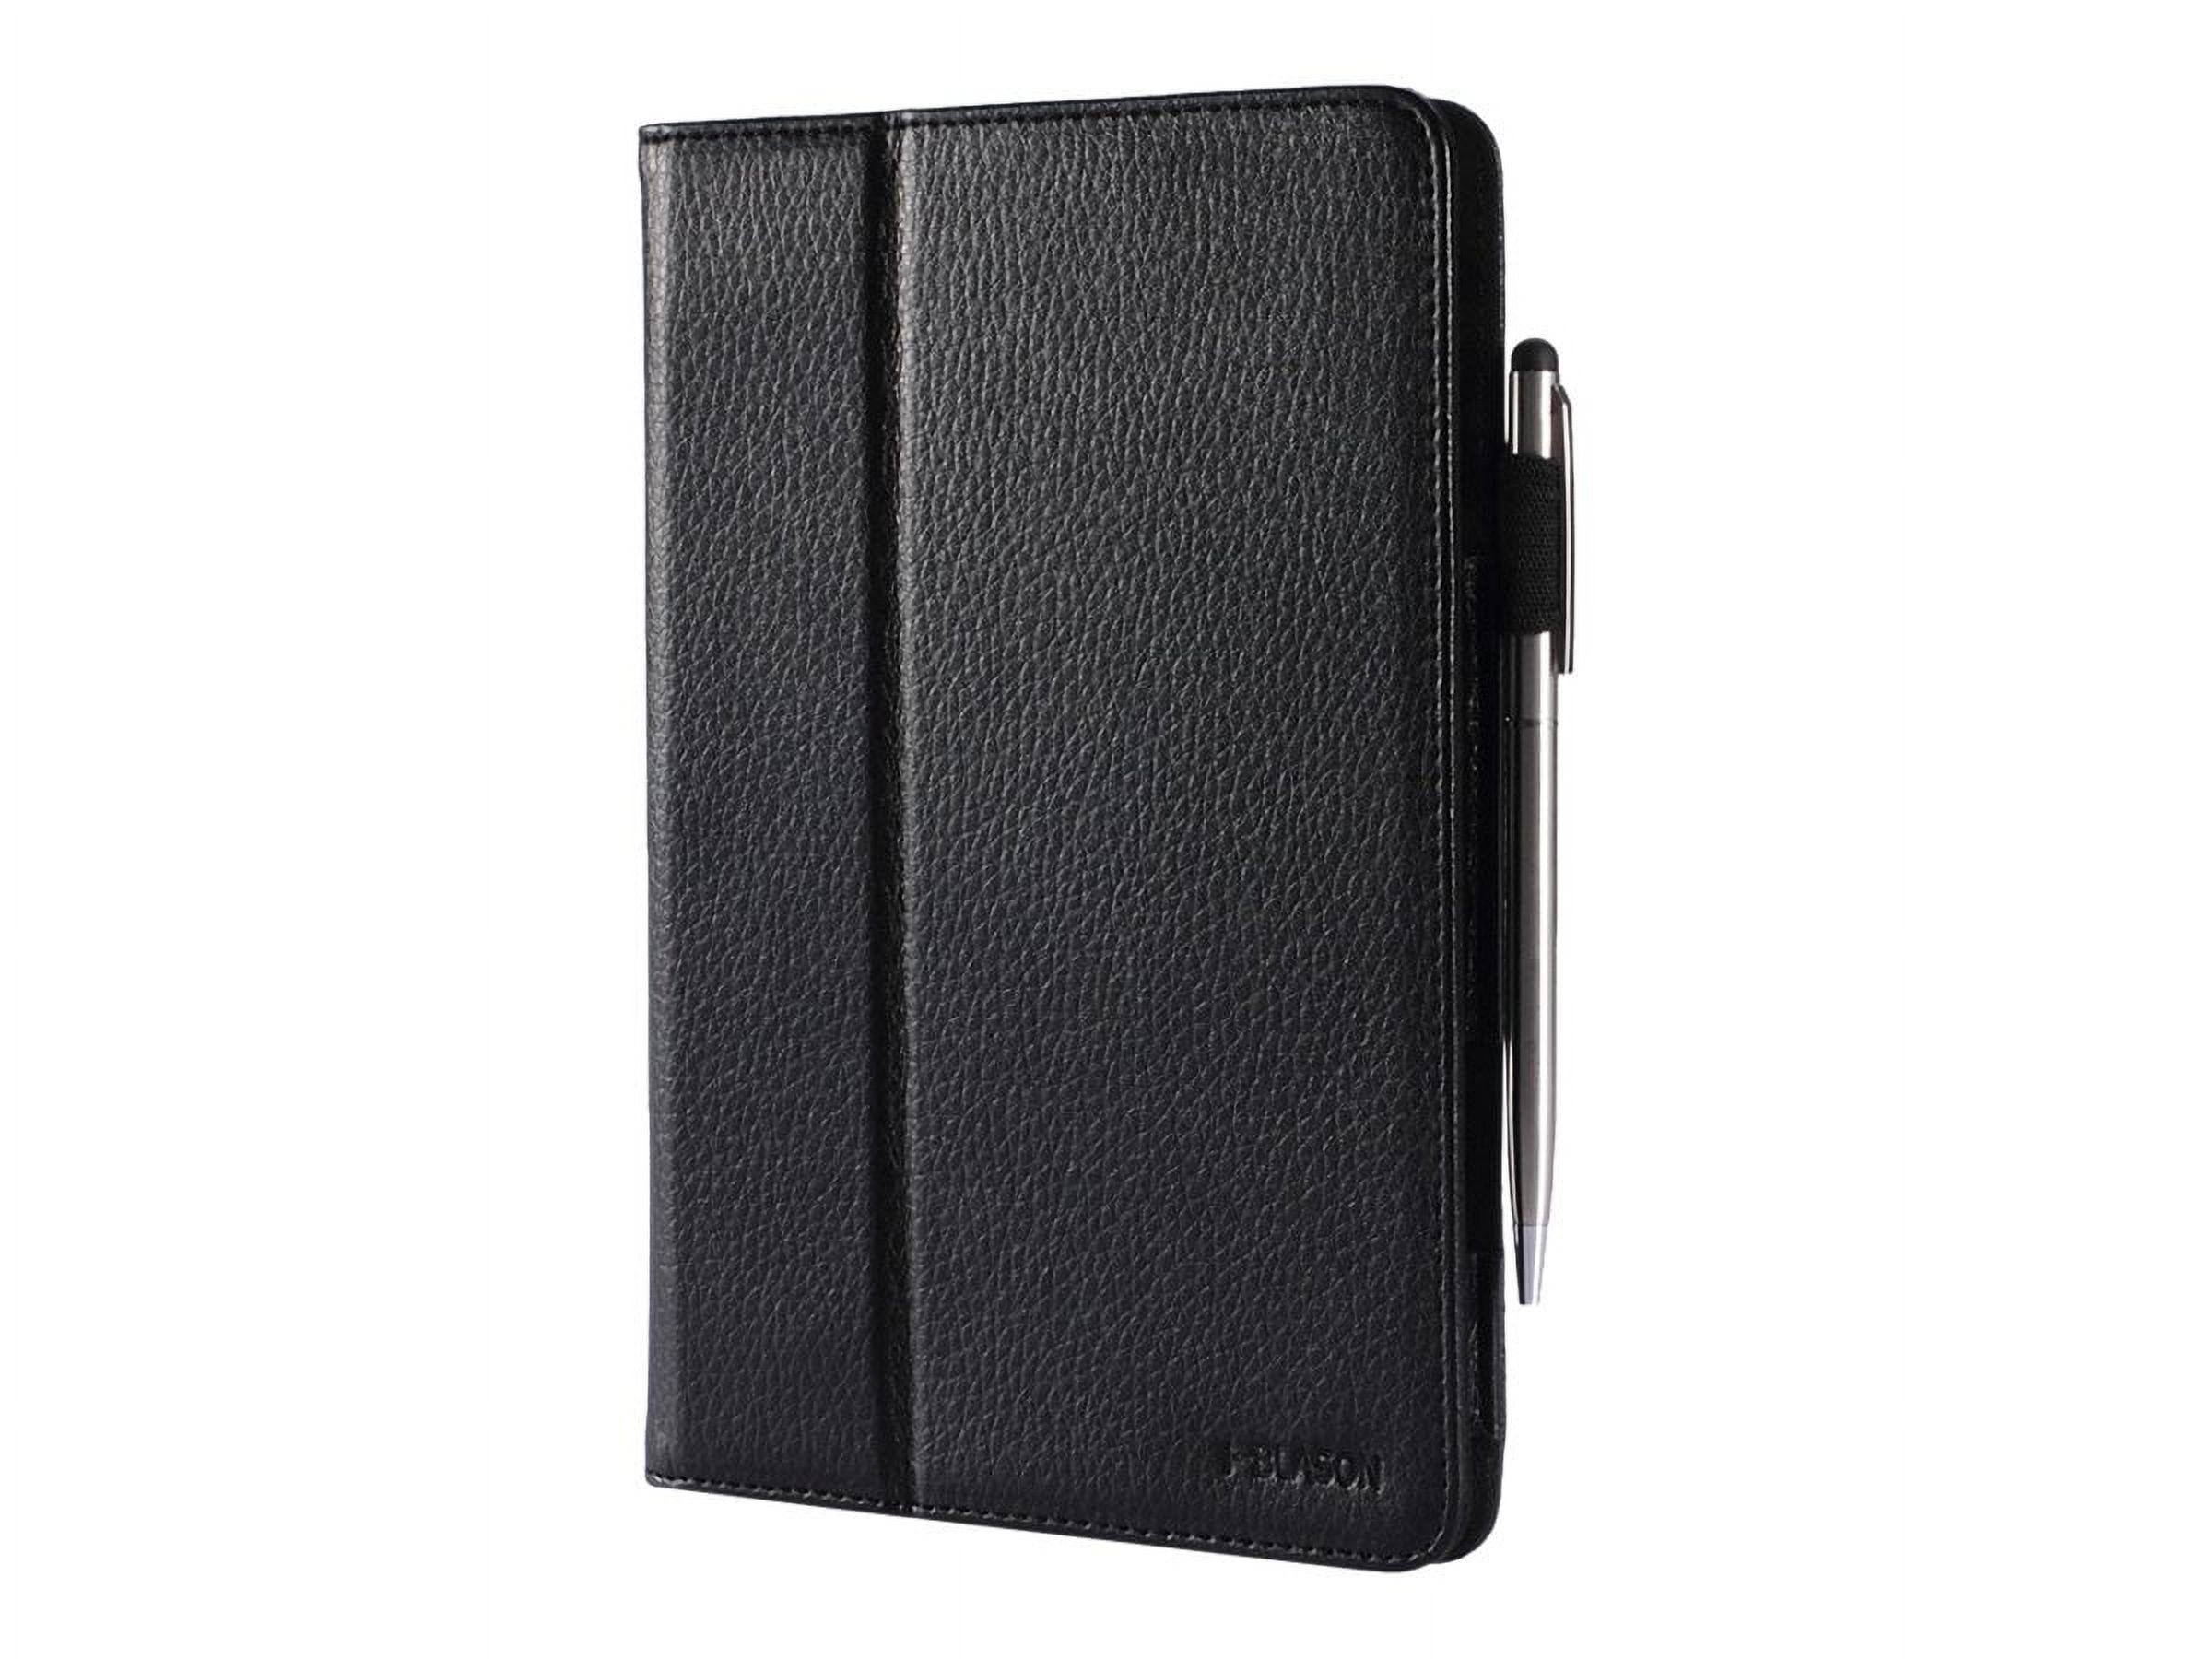 i-Blason Slim Book - Flip cover for tablet - synthetic leather - black - image 1 of 6